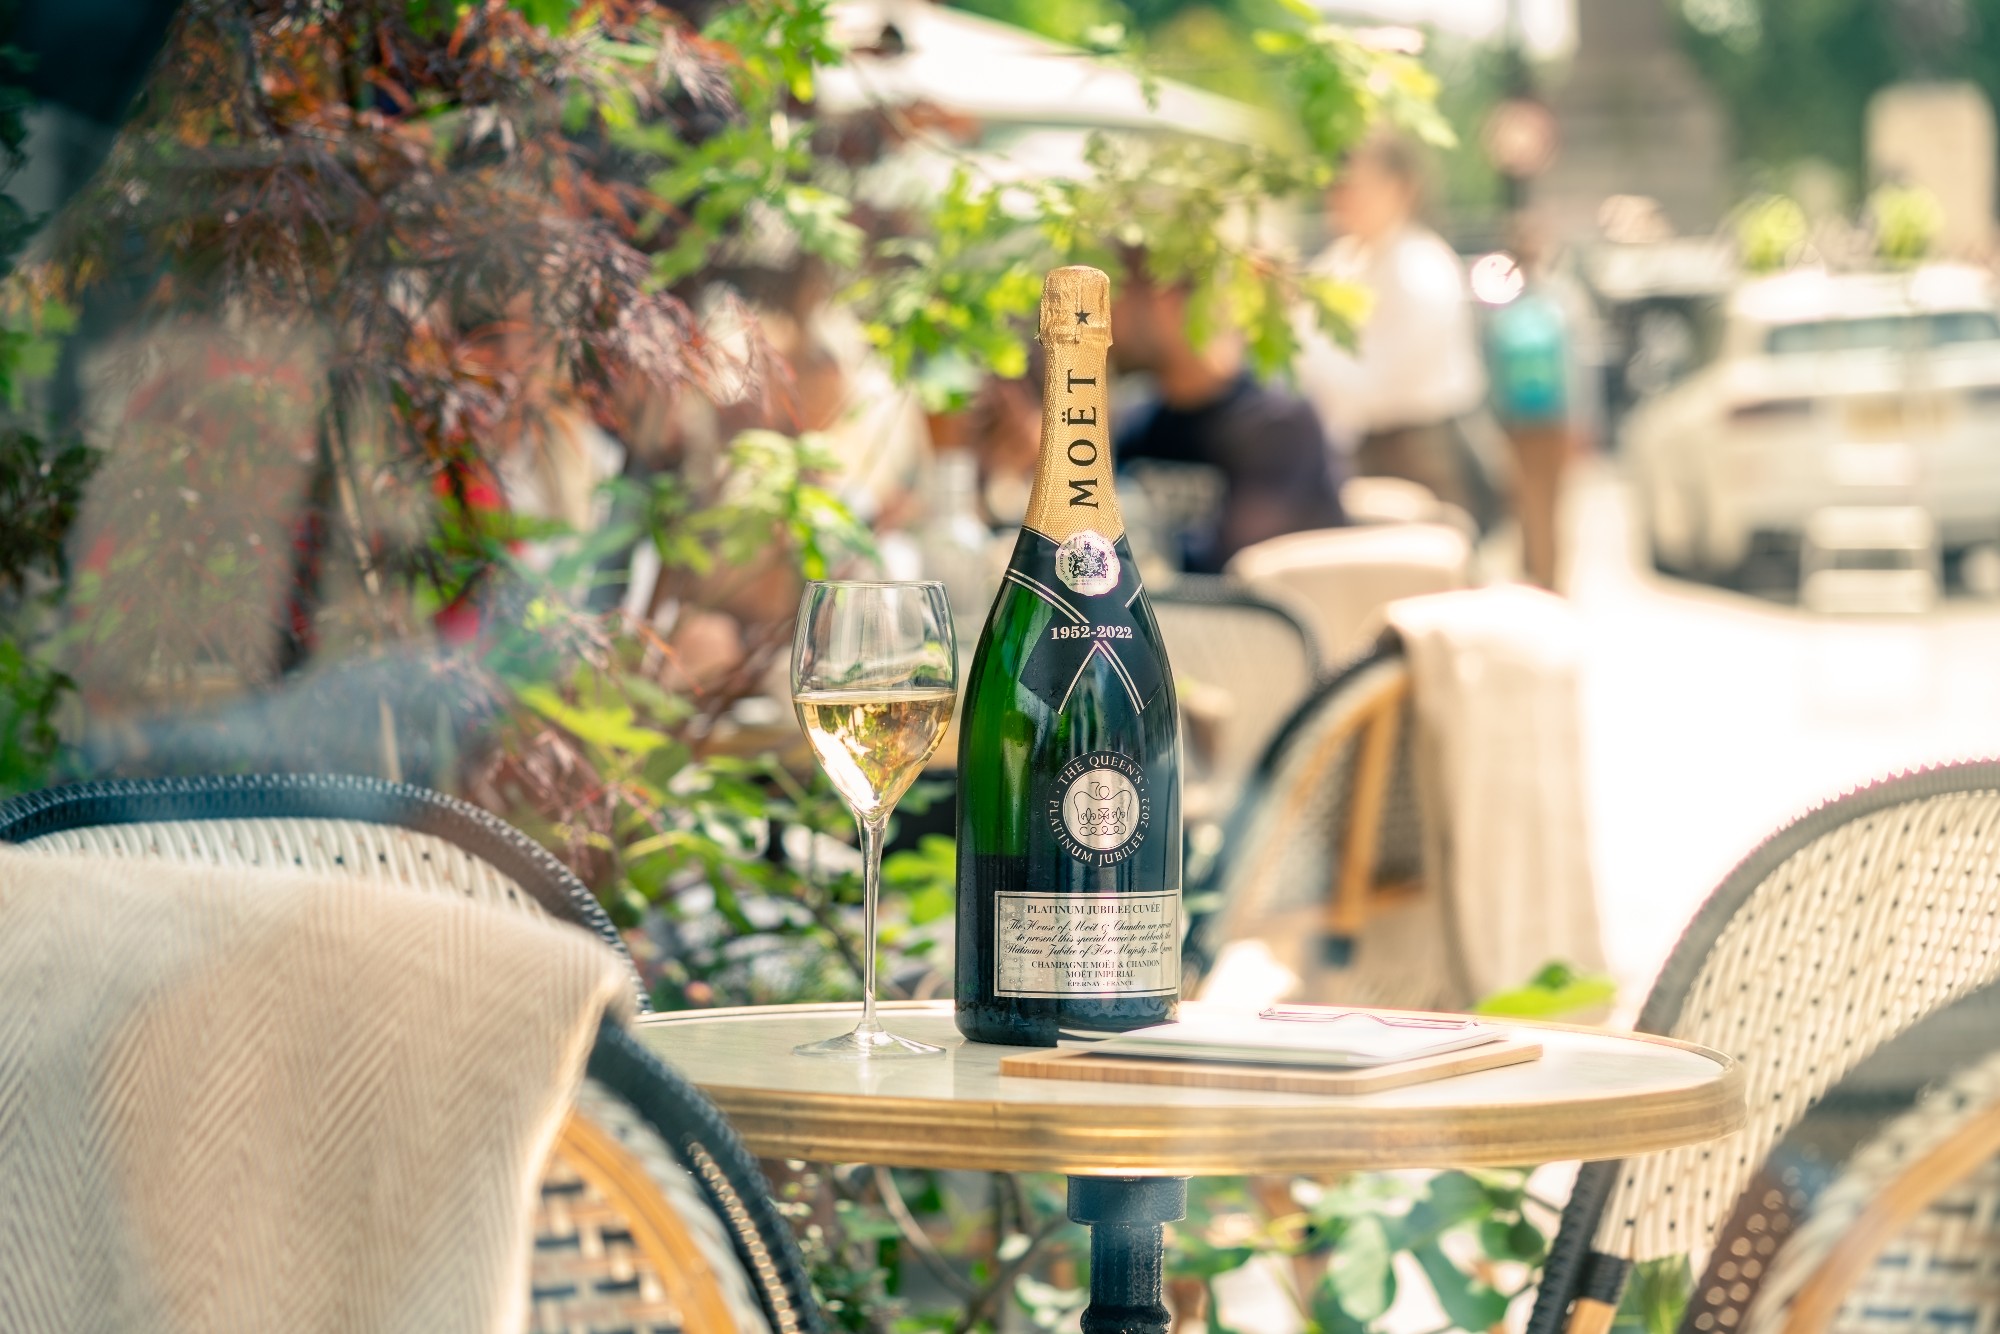 Flora at Sofitel London St James is now open and serving summery glasses of Moët & Chandon alongside seafood, cocktails and bistro classics